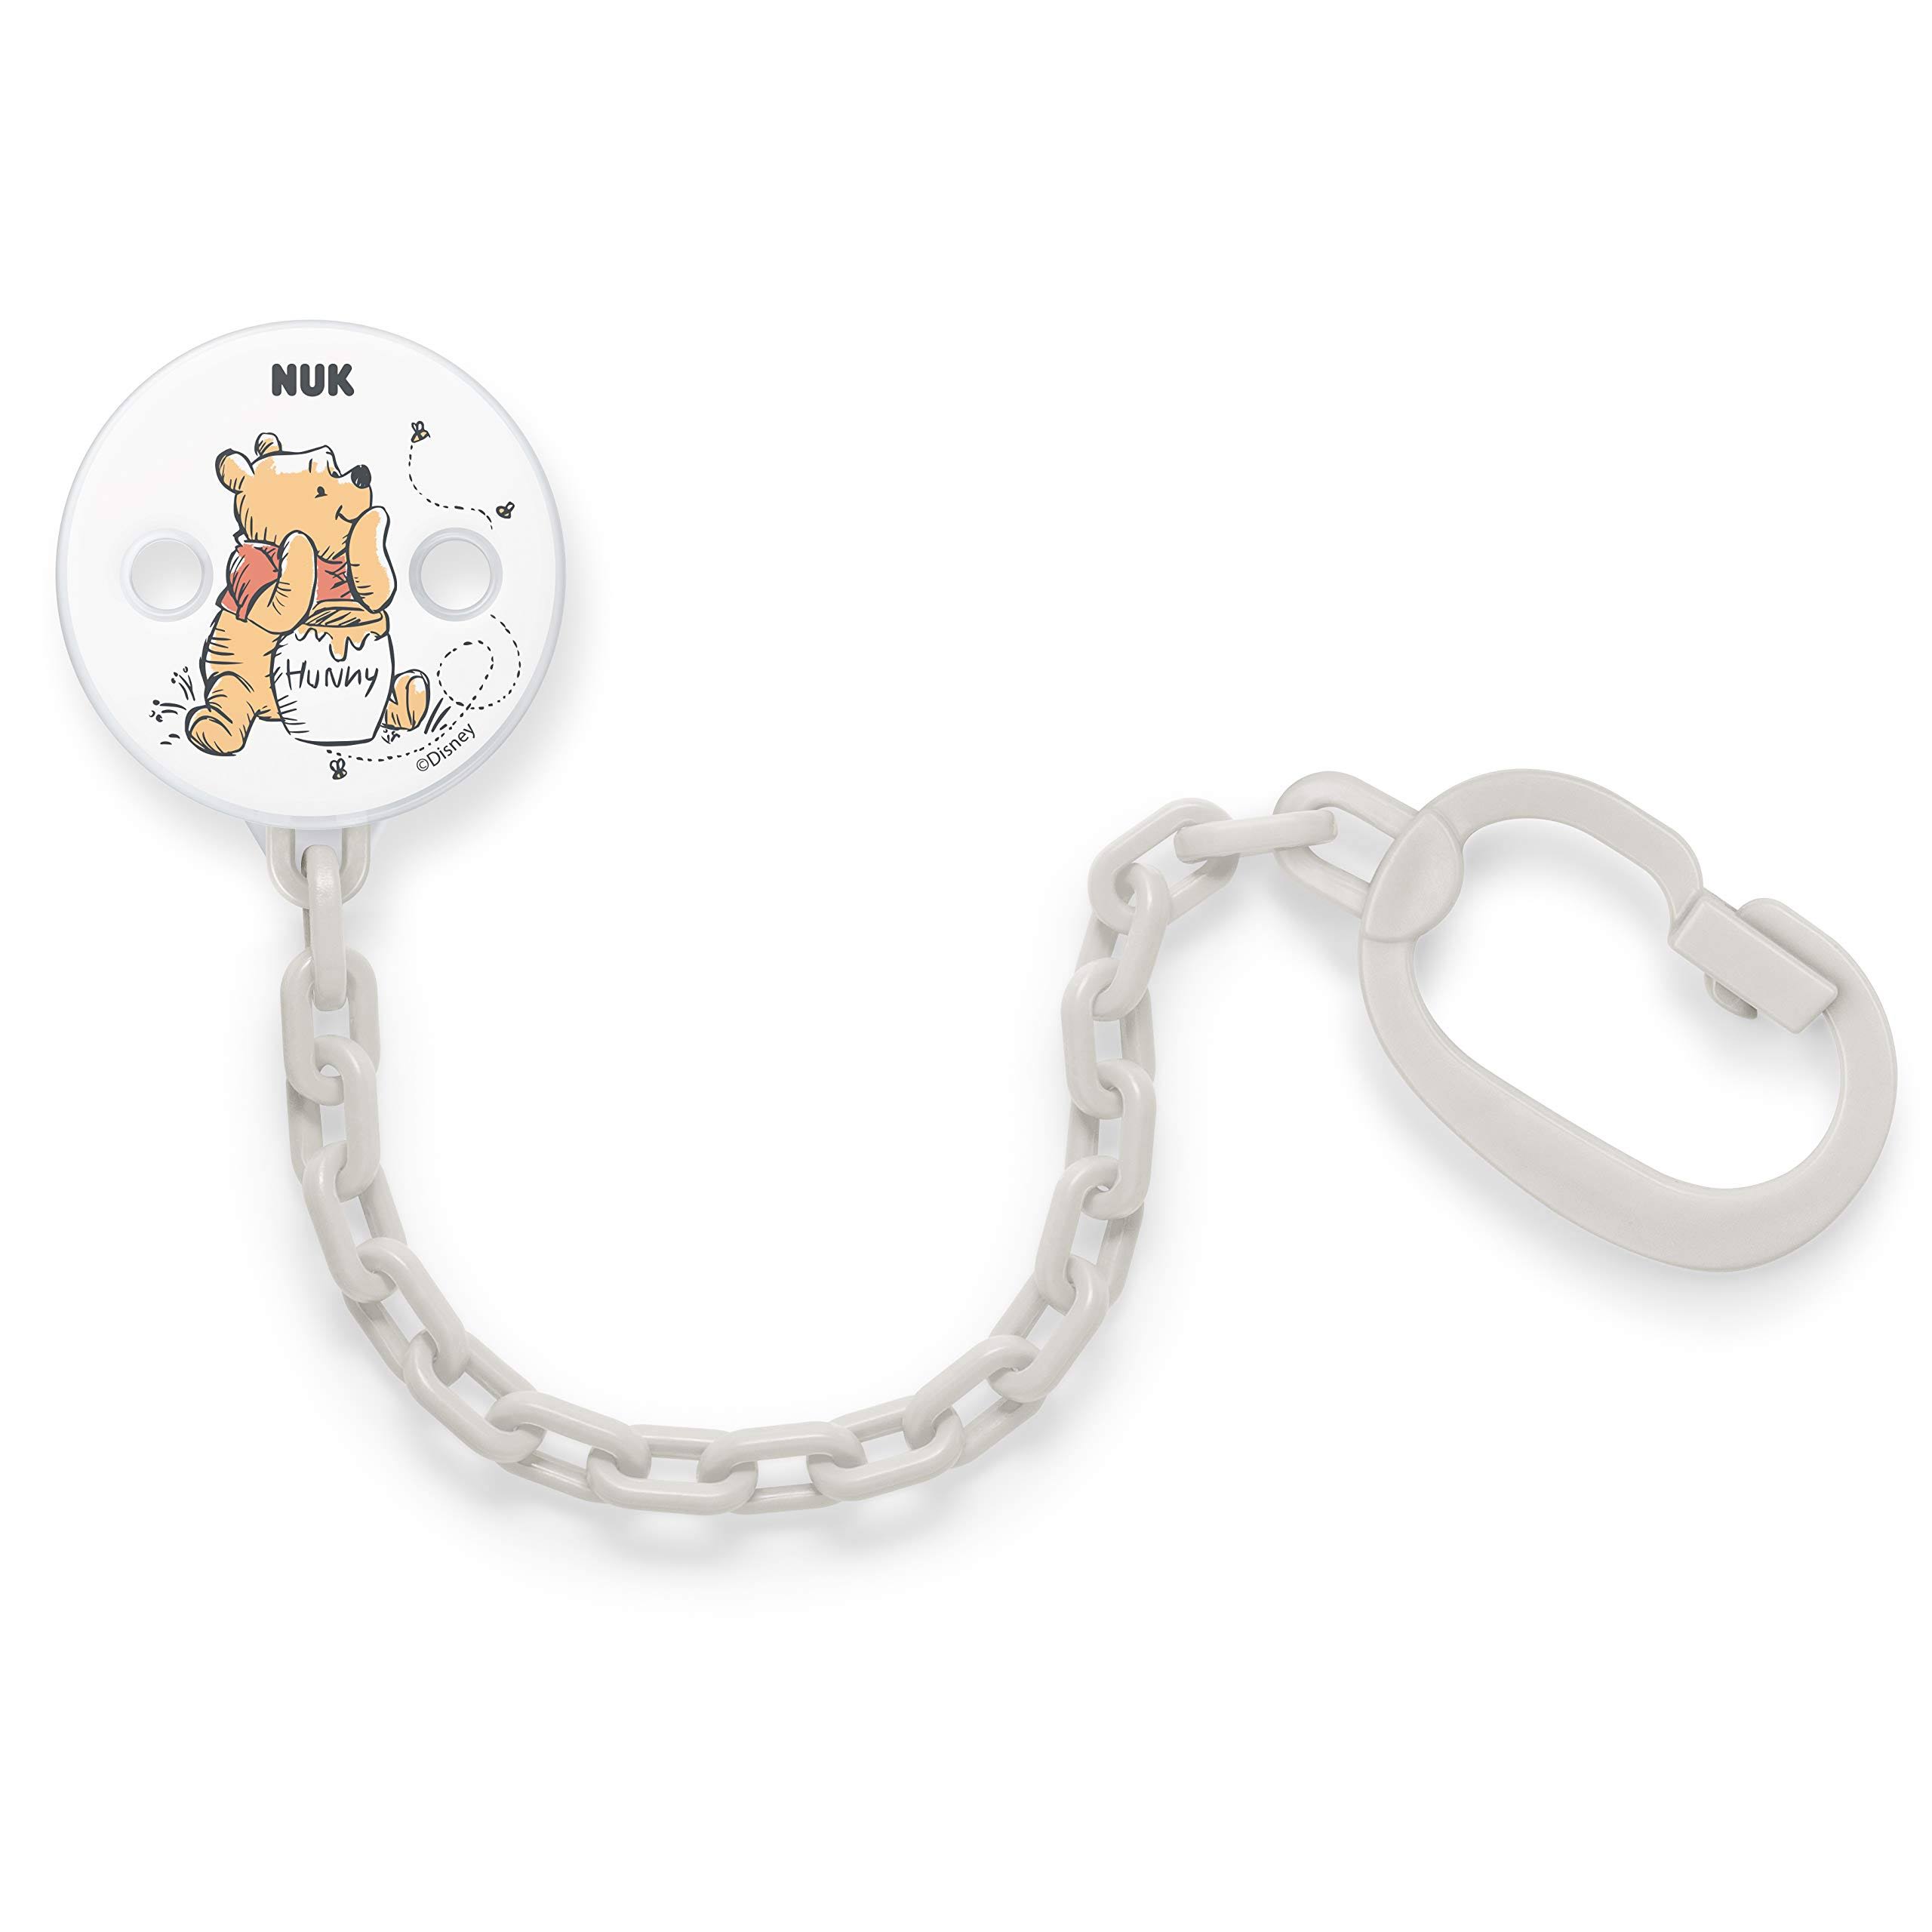 Nuk Dummy Clip for Ring Soothers, Resilient and Shatter-Proof Pacifier Chain, Disney Winnie The Pooh